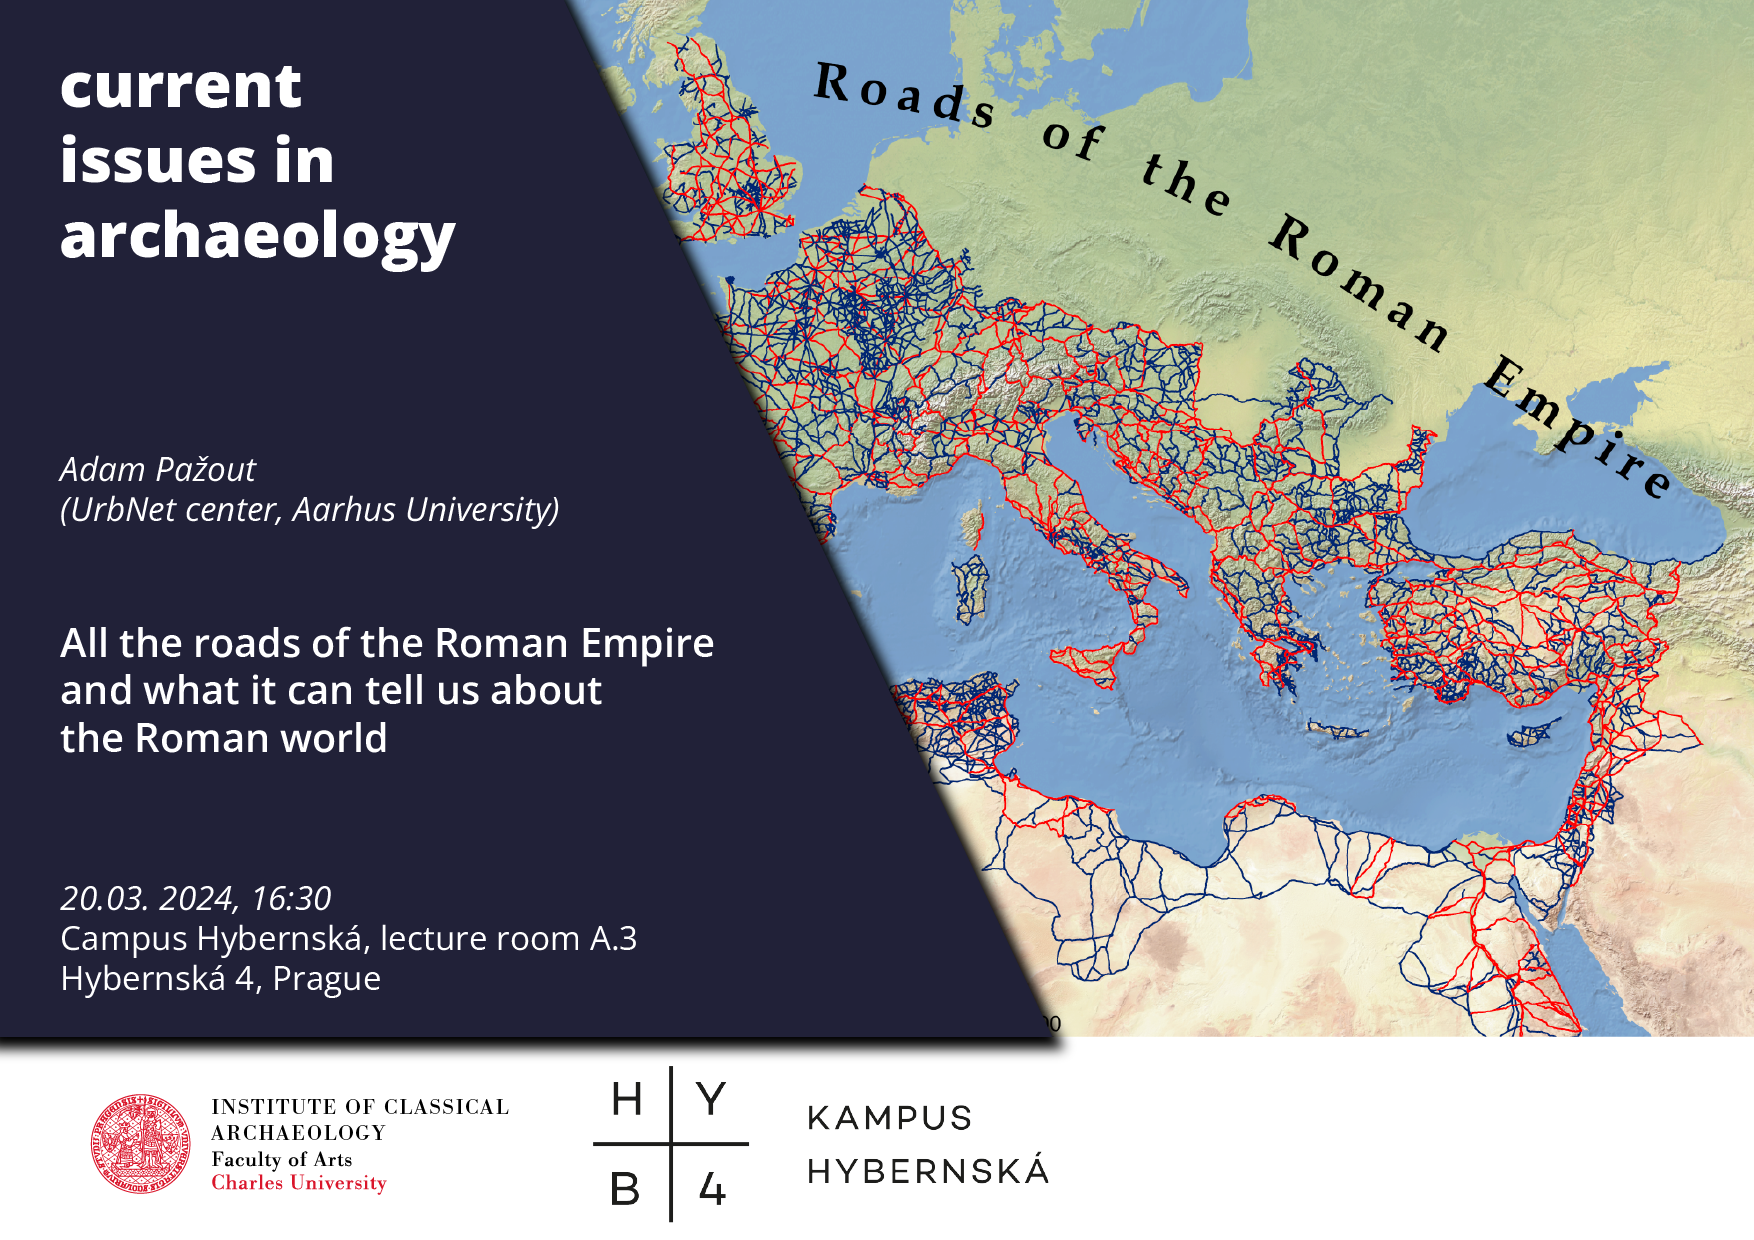 A. Pažout (Aarhus University): "All the roads of the Roman empire and what it can tell us about the Roman world" @ Kampus Hybernská, lecture room A.3